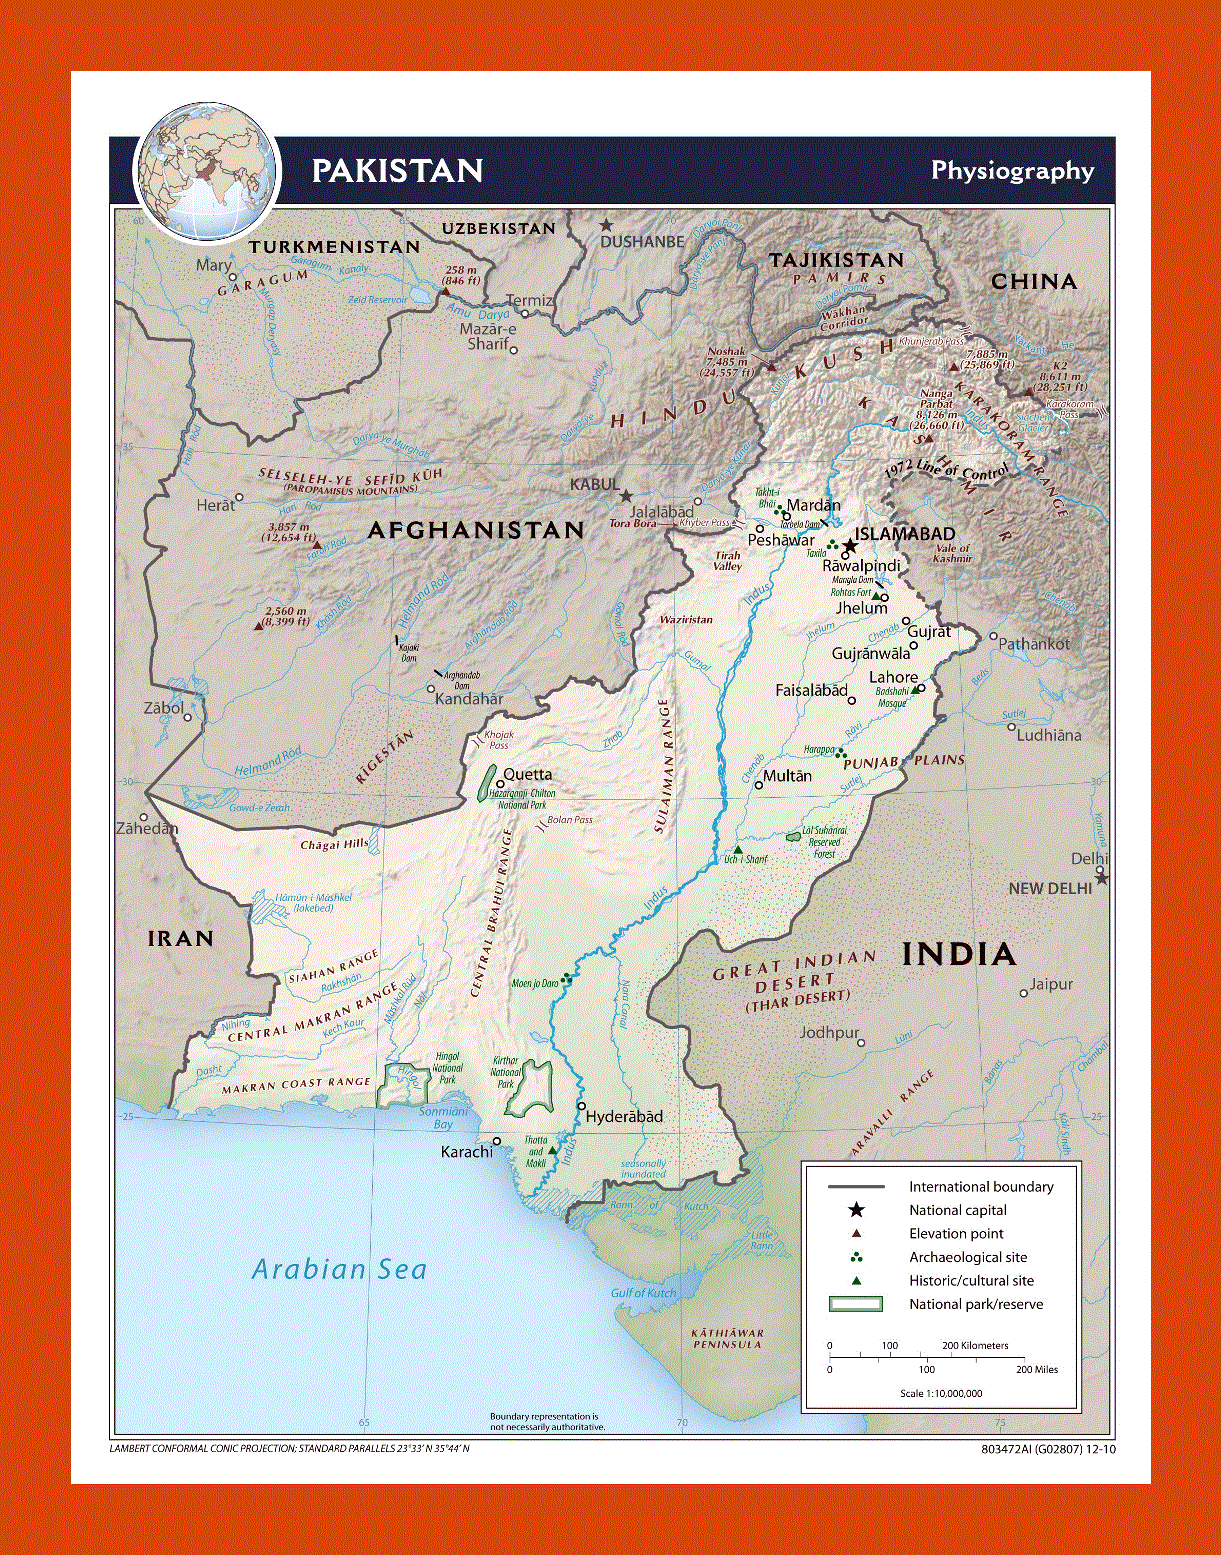 Physiography map of Pakistan - 2010